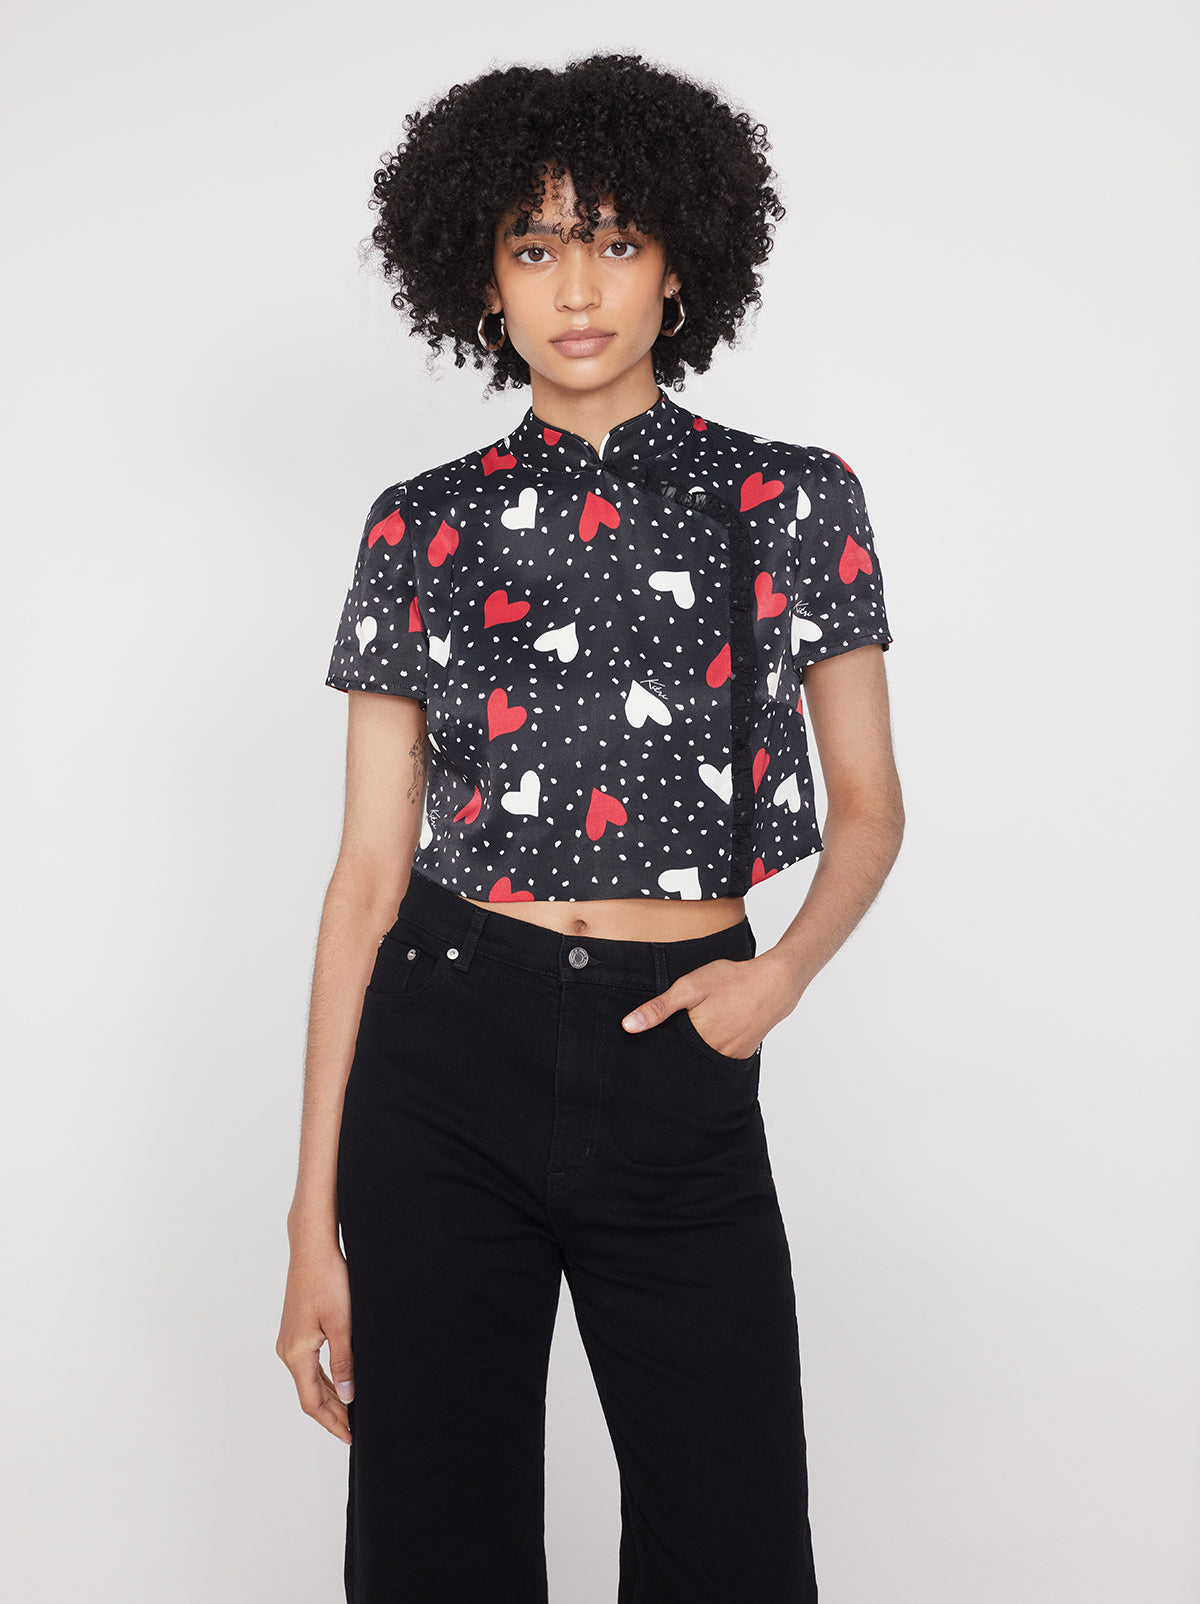 Pearl Red Heart Print Top By KITRI Studio